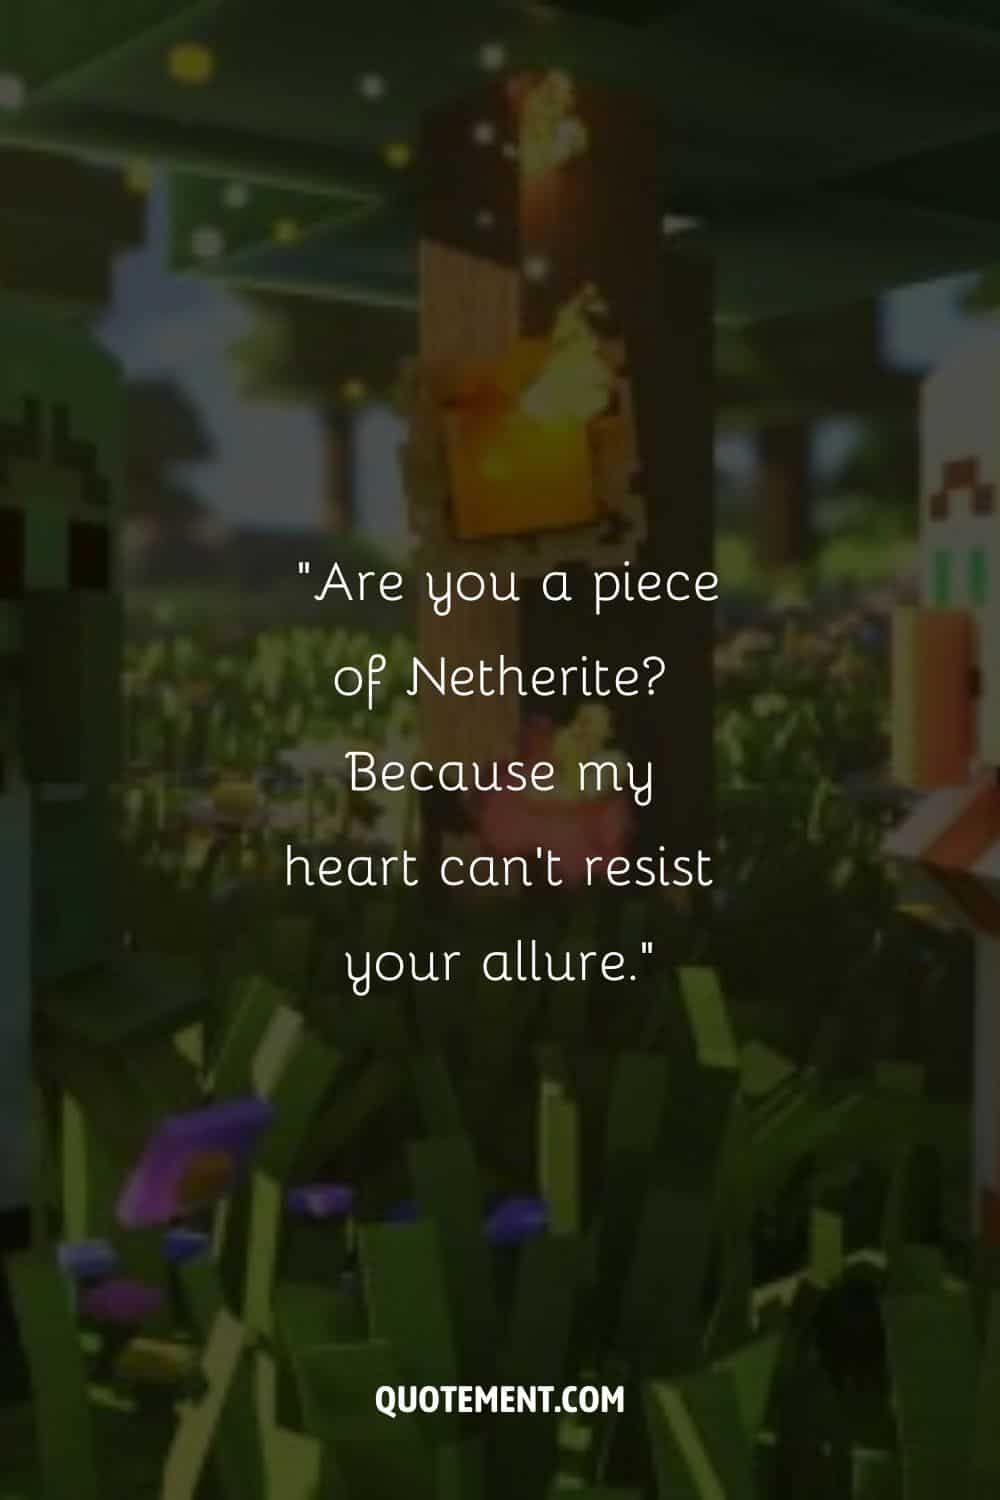 green minecraft character representing best minecraft pick up line